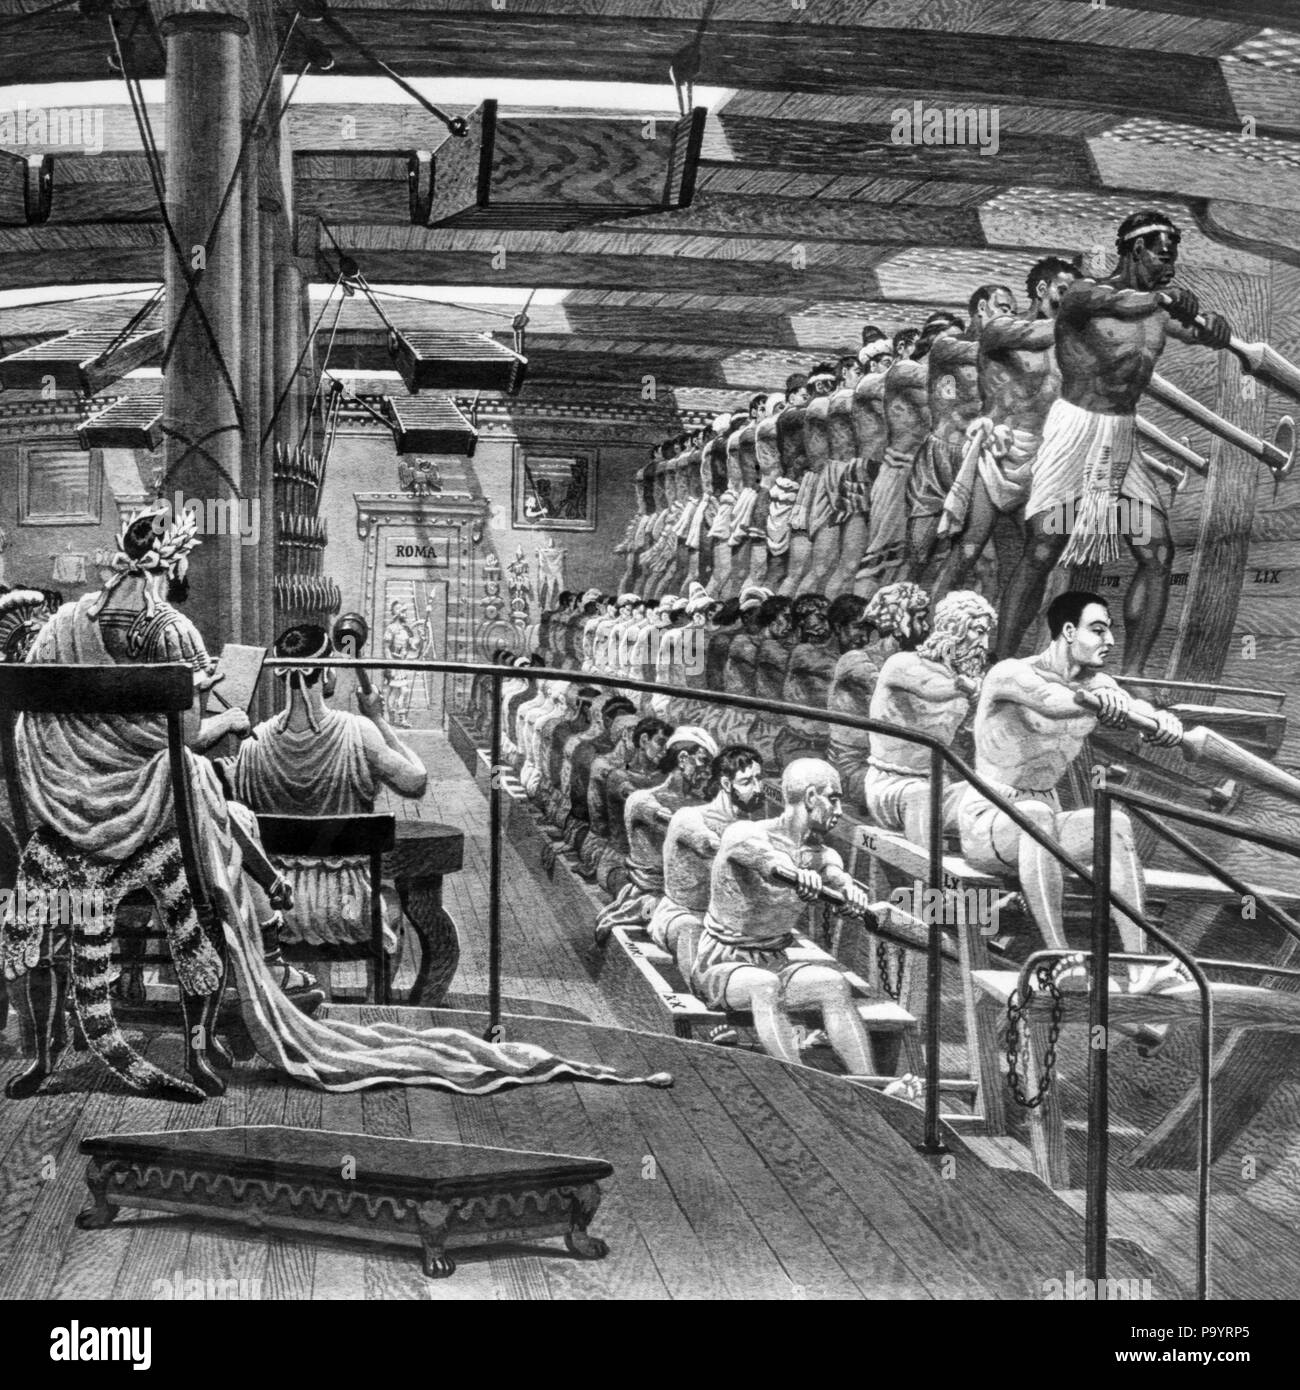 ROMAN TRIREME GALLEY  WAR SHIP INTERIOR WITH THREE TIERS OF MEN ROWING USUALLY FREE MEN OR SOMETIMES GALLEY SLAVES - a6008 SPL001 HARS WARSHIP ACTIVITY ANCIENT OCCUPATION PHYSICAL SLAVERY STRENGTH POWERFUL PRISONER TIERS OARS OCCUPATIONS RHYTHMIC FLEXIBILITY GALLEY MUSCLES OAR ROWERS BEALE COOPERATION SLAVE SYNCHRONIZED TOGETHERNESS BLACK AND WHITE MANPOWER OLD FASHIONED SLAVES Stock Photo